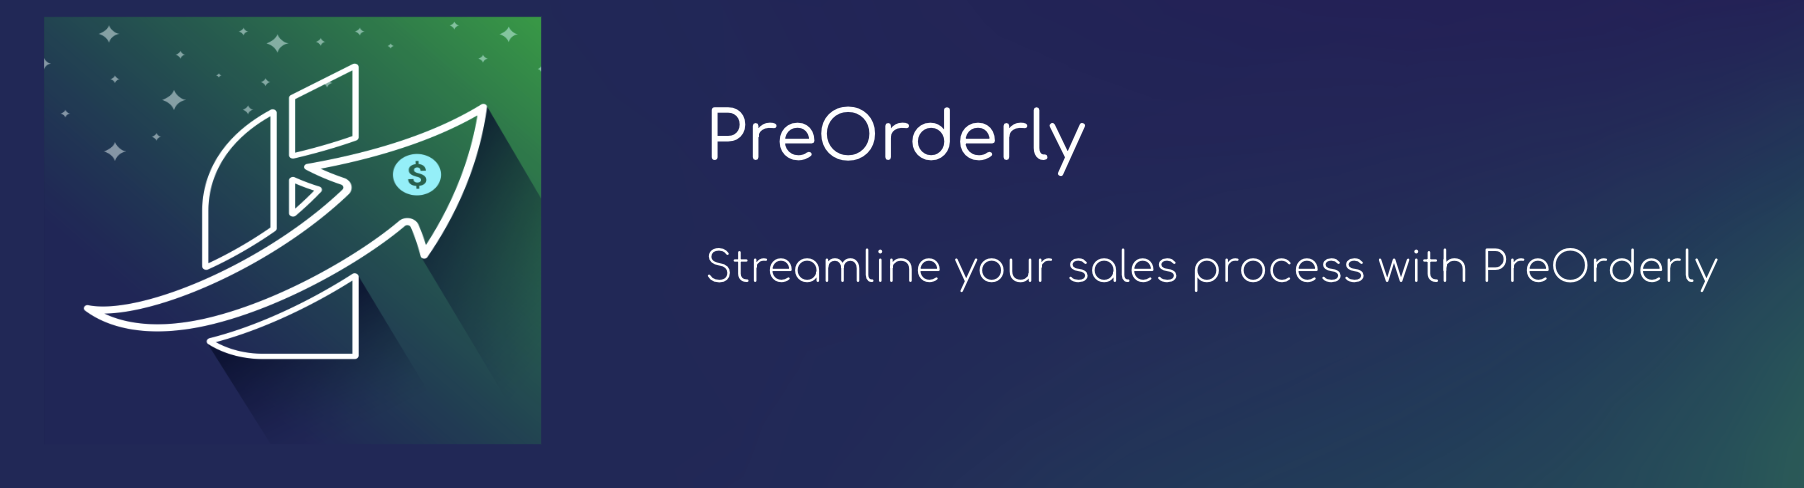 Enable Preorderly